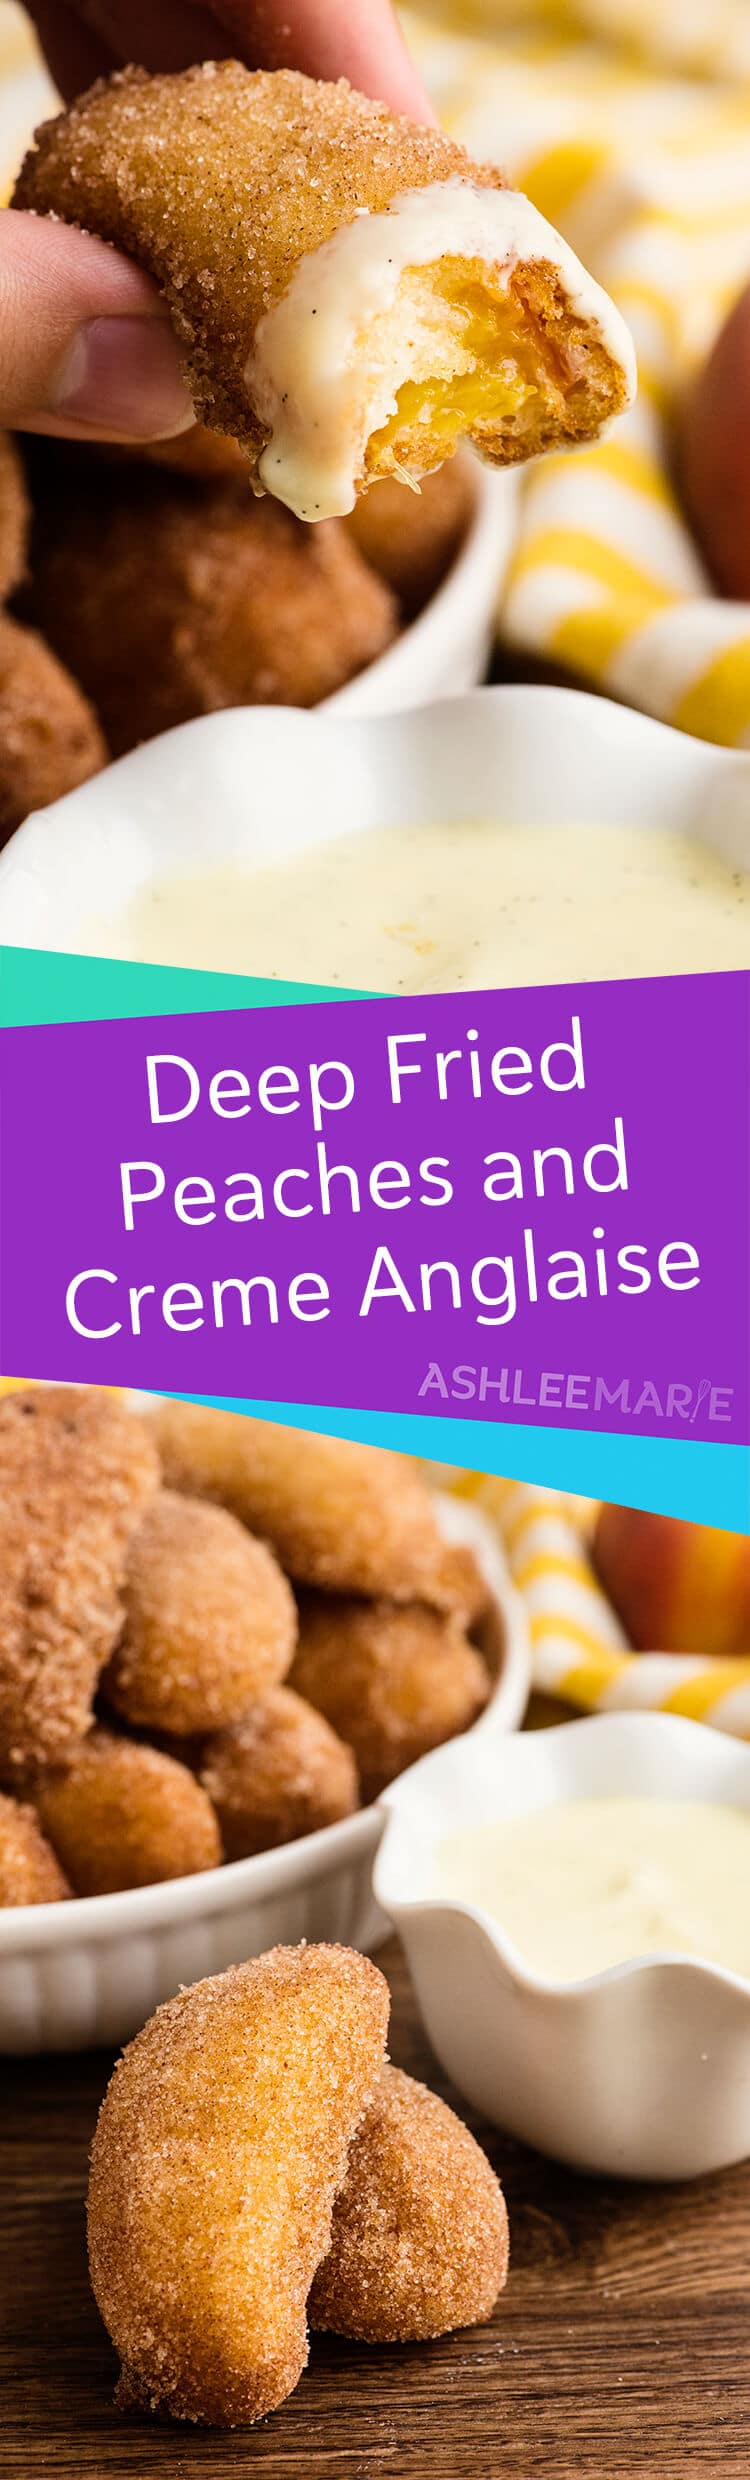 deep fried peaches and creme anglaise recipe and video